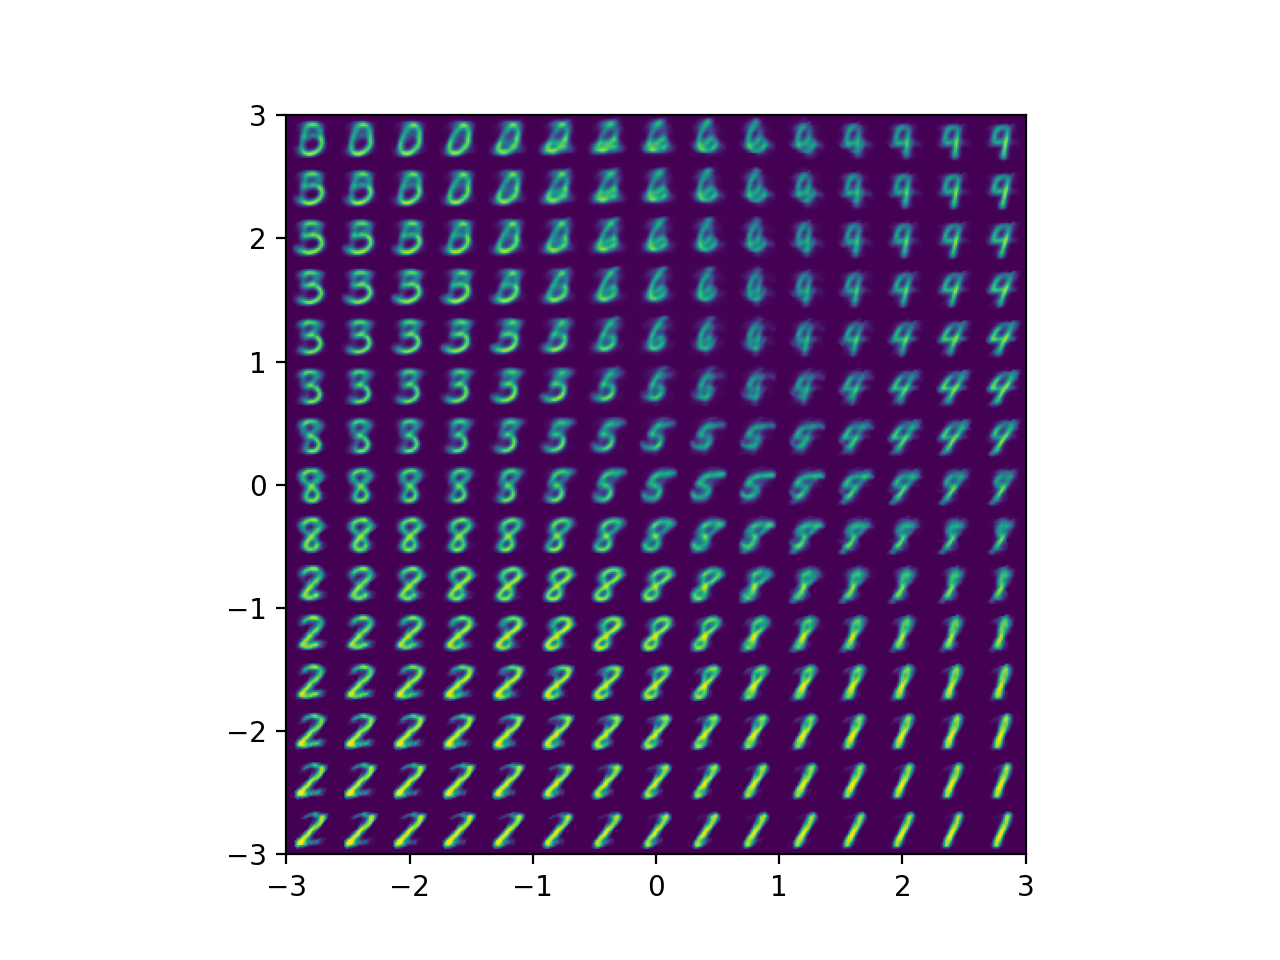 vae_mnist_shallow_model_latent_dim2_reconstruct_images_epoch25